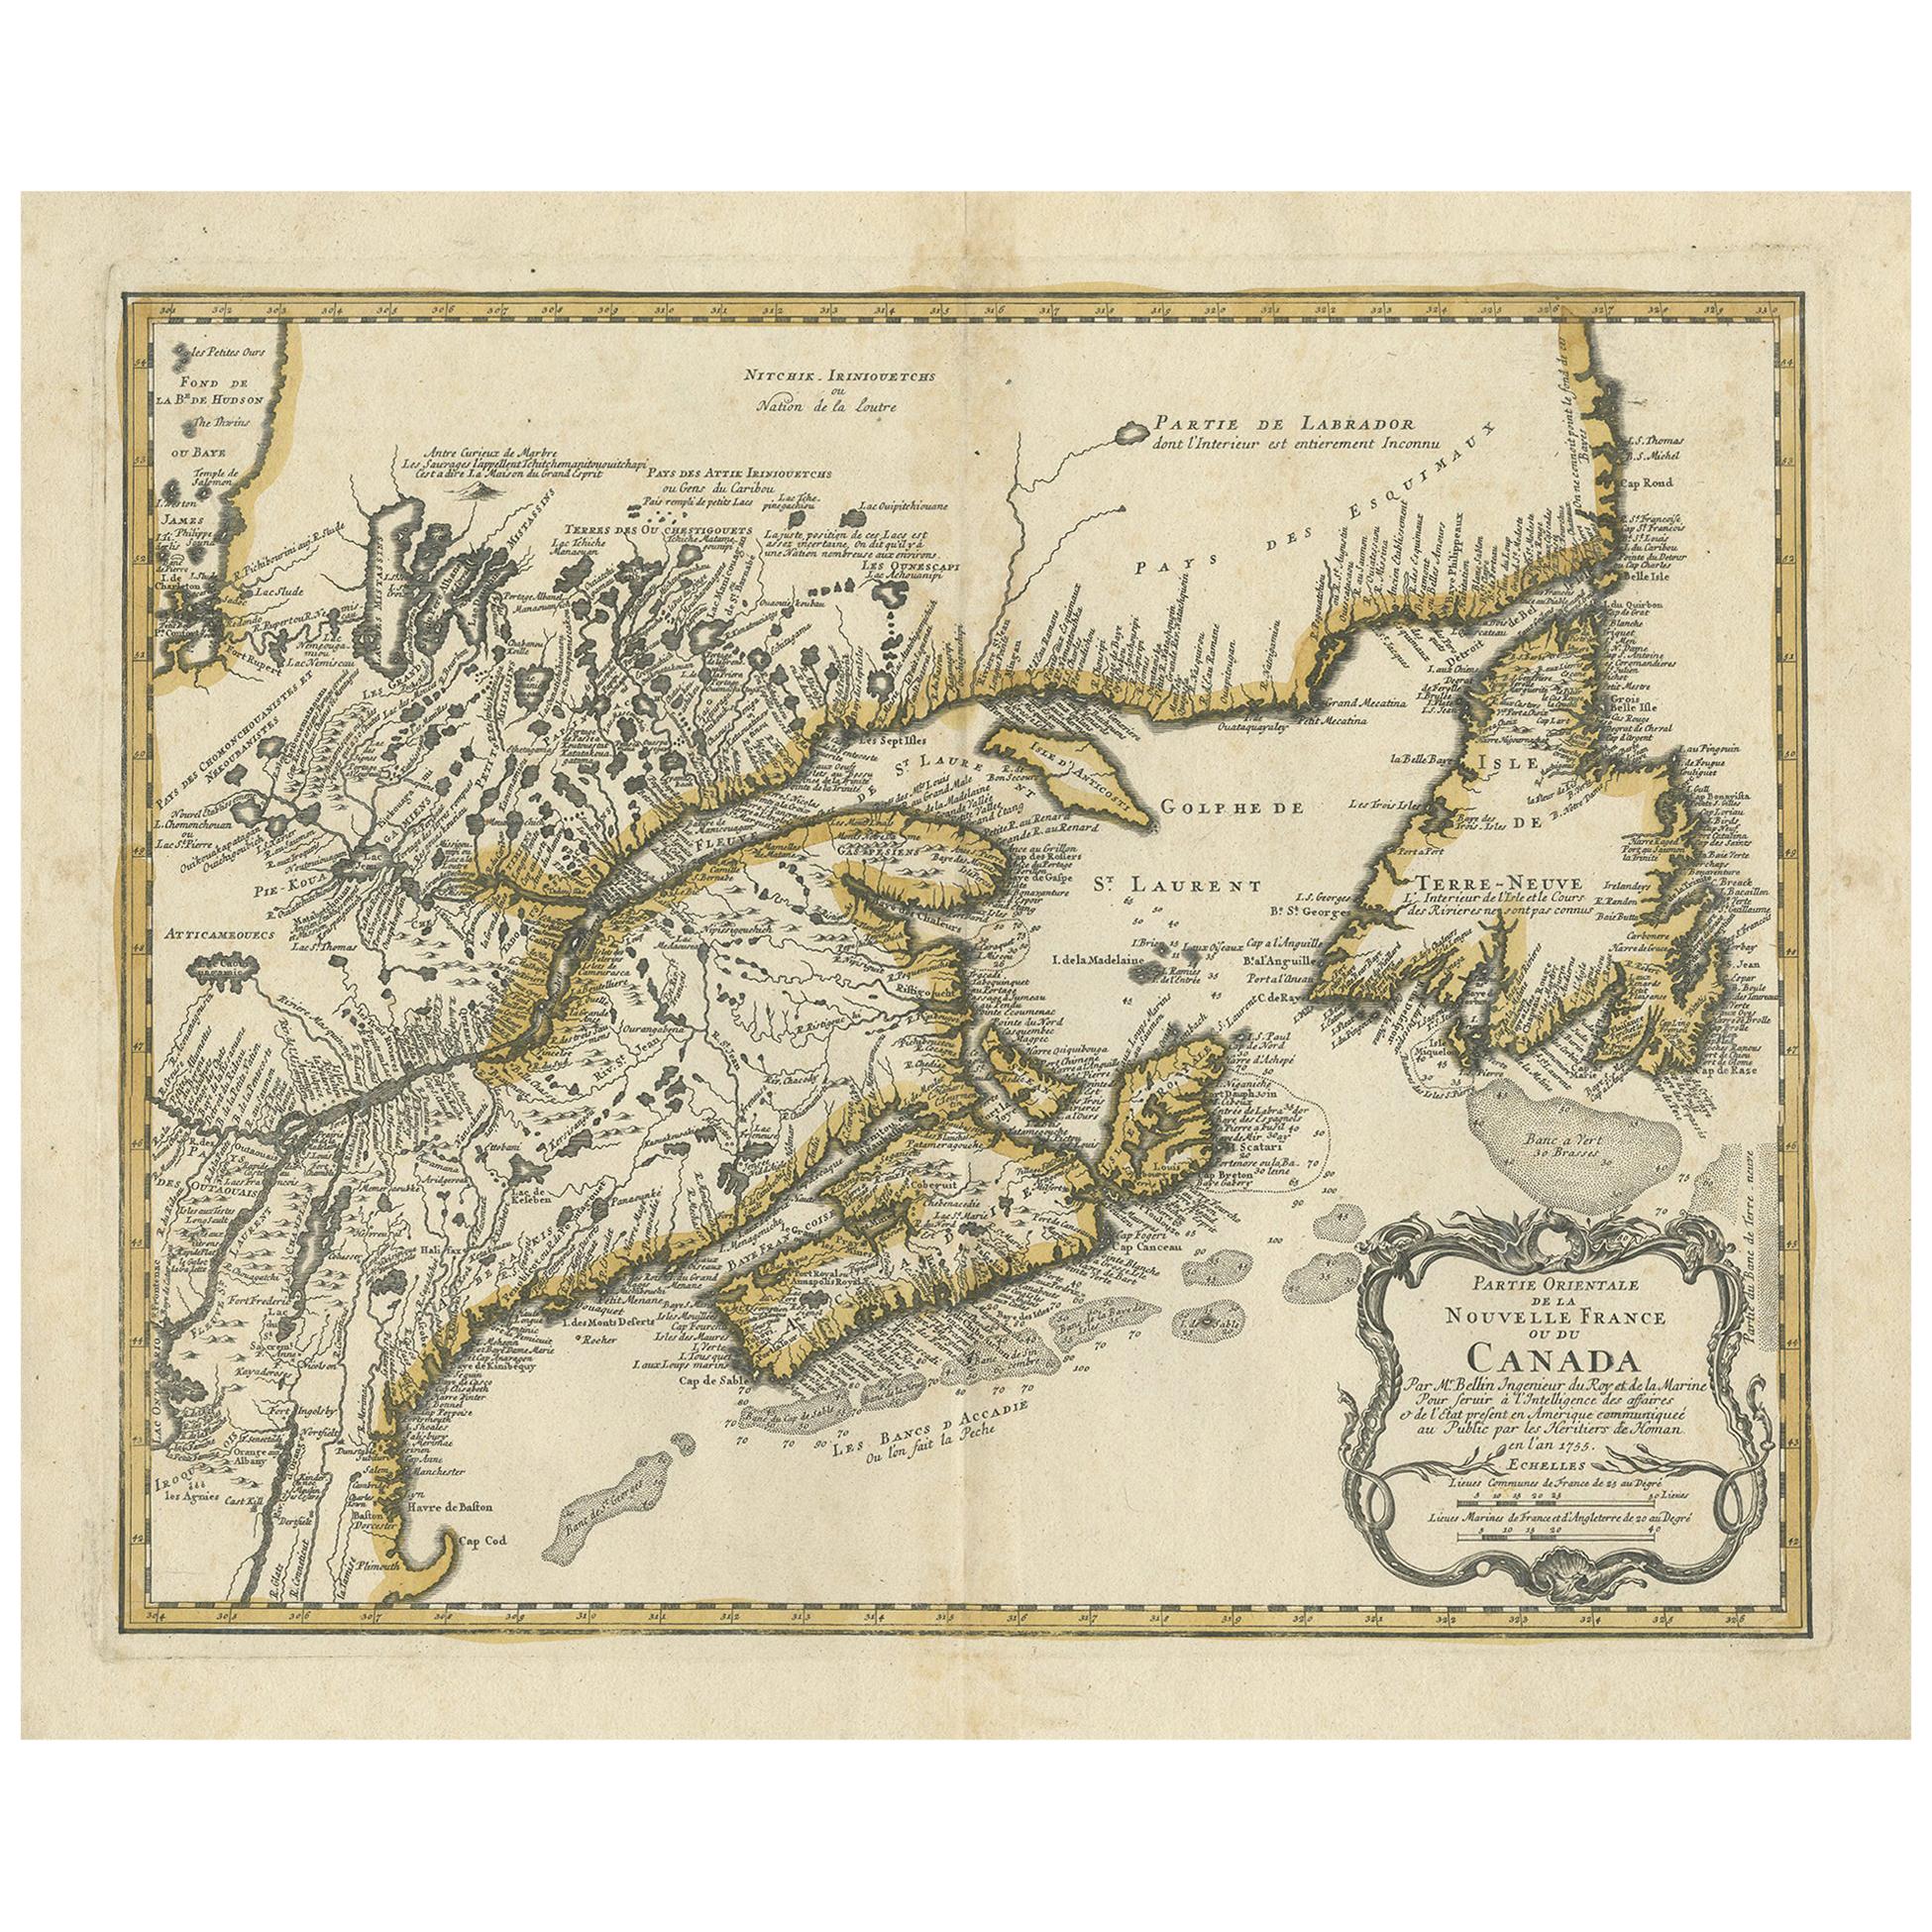 Antique Map of New England and Eastern Canada by Homann Heirs, circa 1755